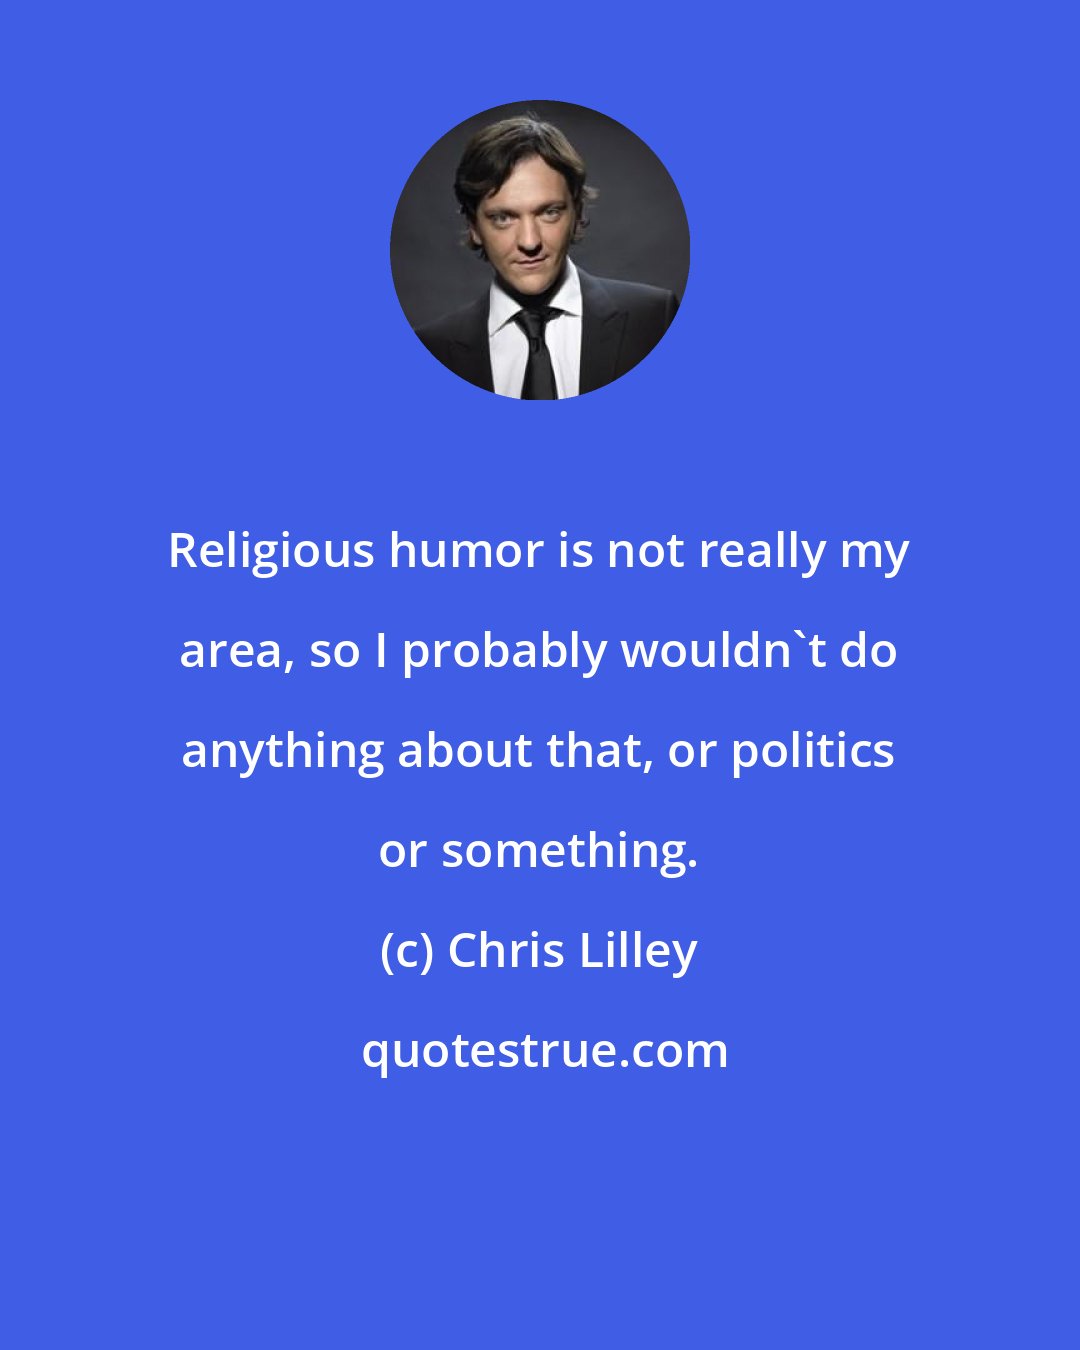 Chris Lilley: Religious humor is not really my area, so I probably wouldn't do anything about that, or politics or something.